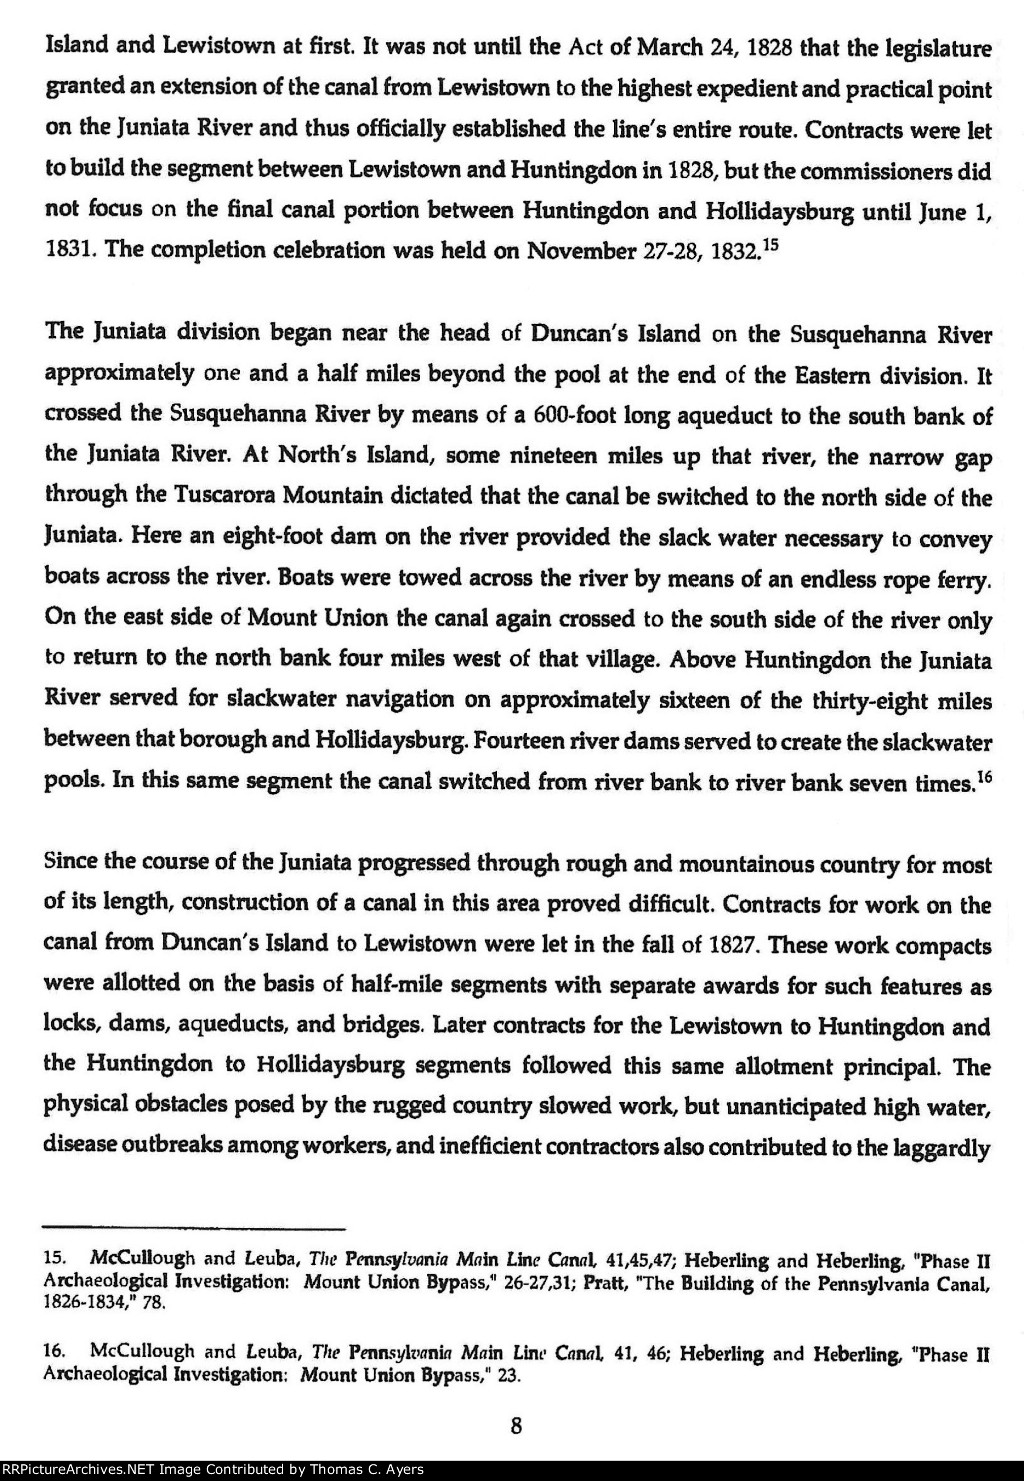 "Pennsylvania Main Line Canal," Page 8, 1993